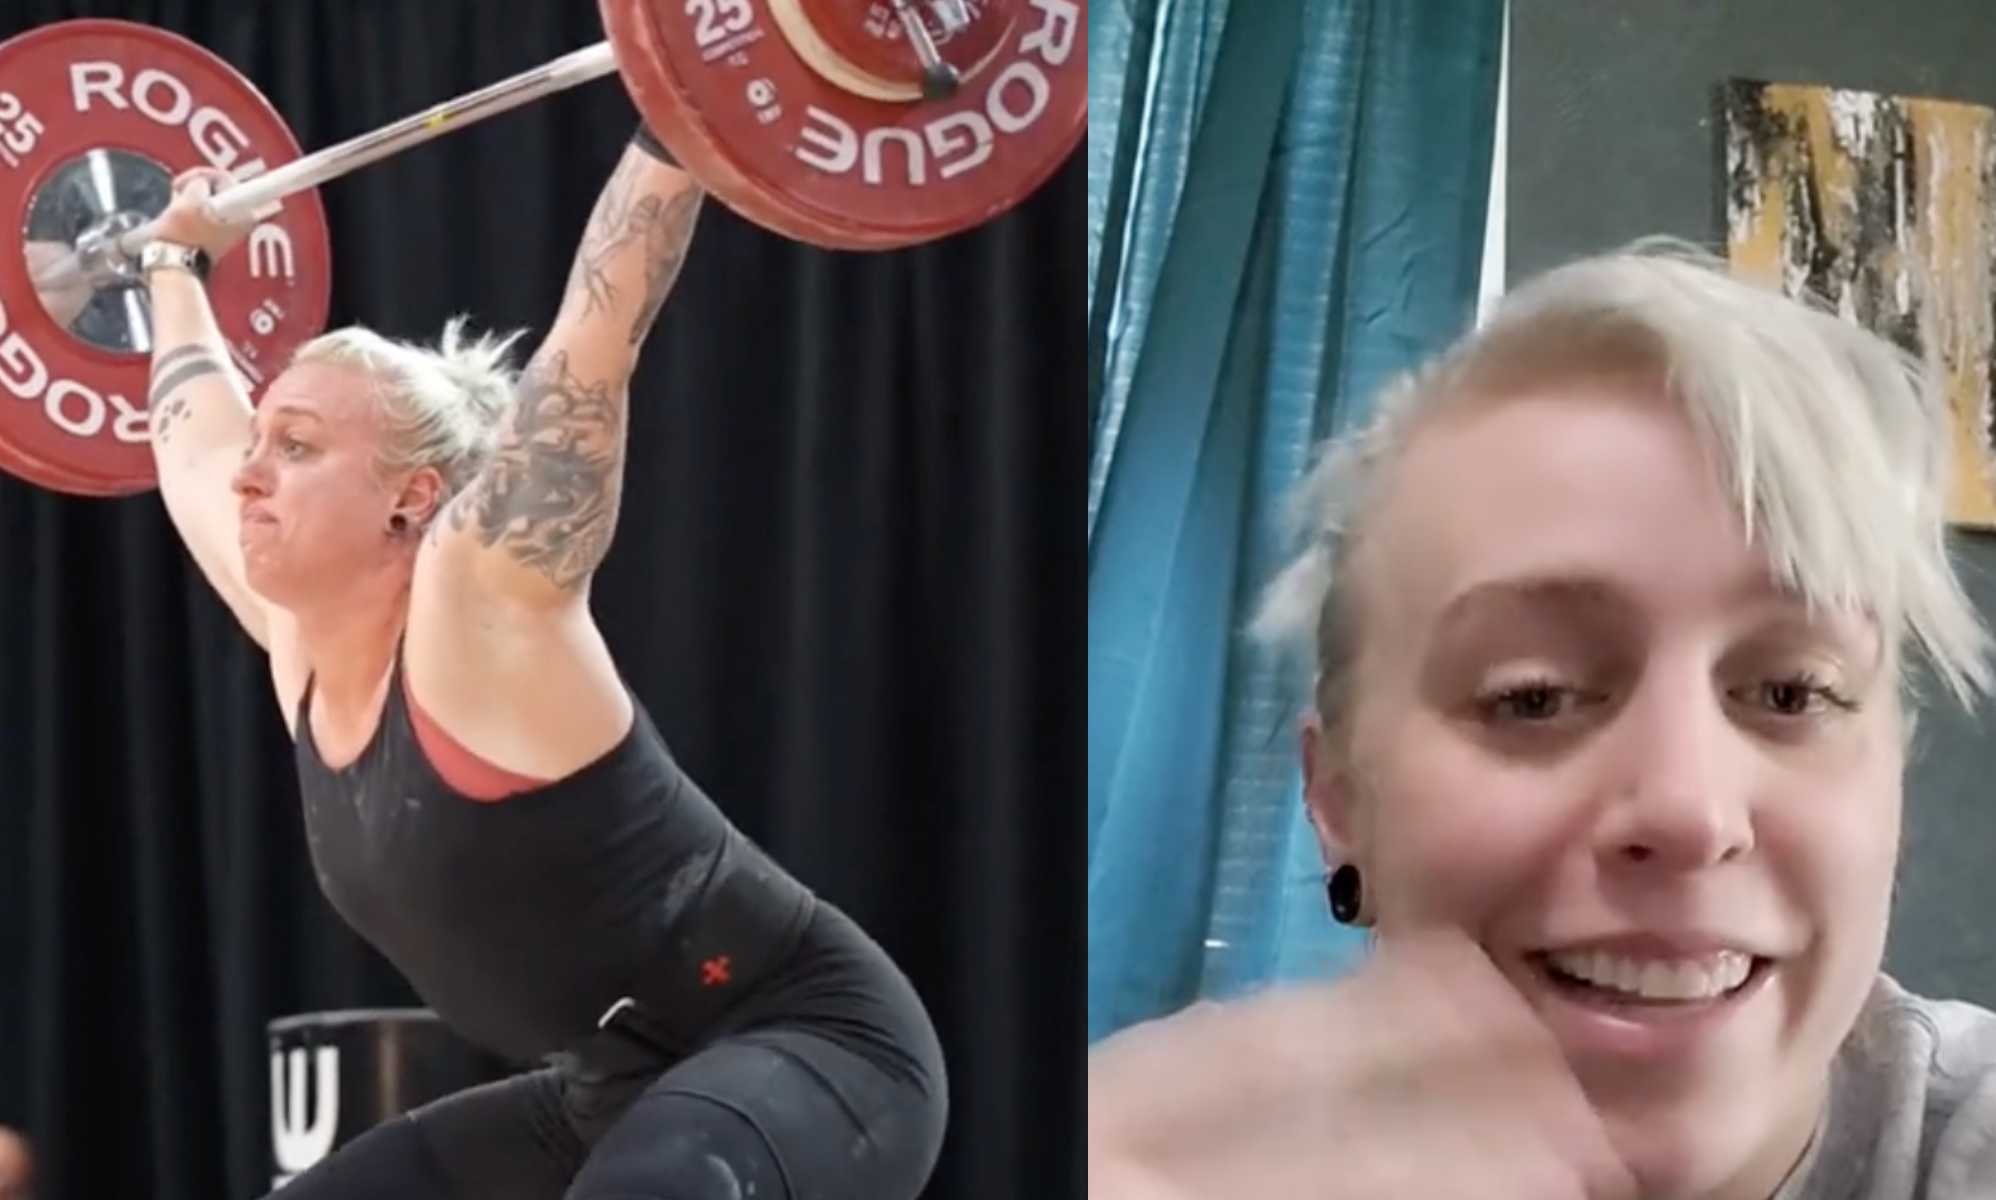 Gym rat' trained hard to lose weight slams trolls who say she's 'too manly'  - Daily Star